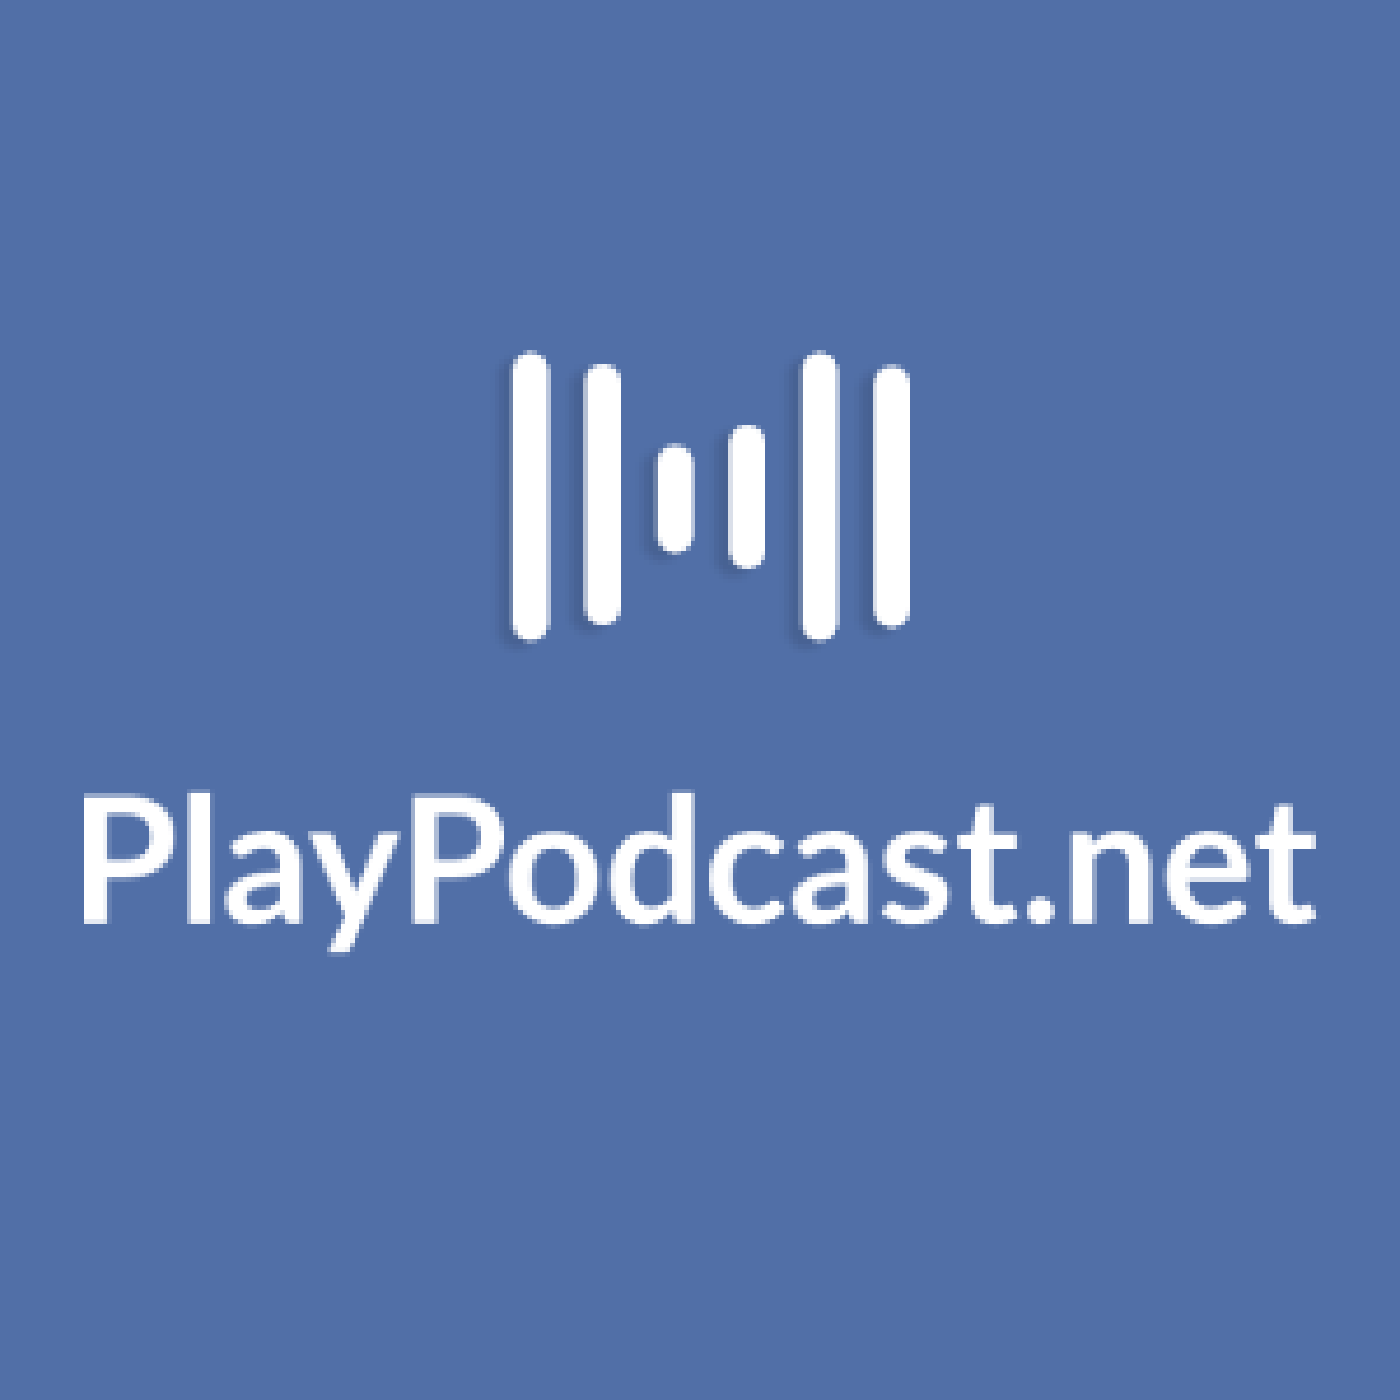 Playpodcast Listen Here To Podcasts